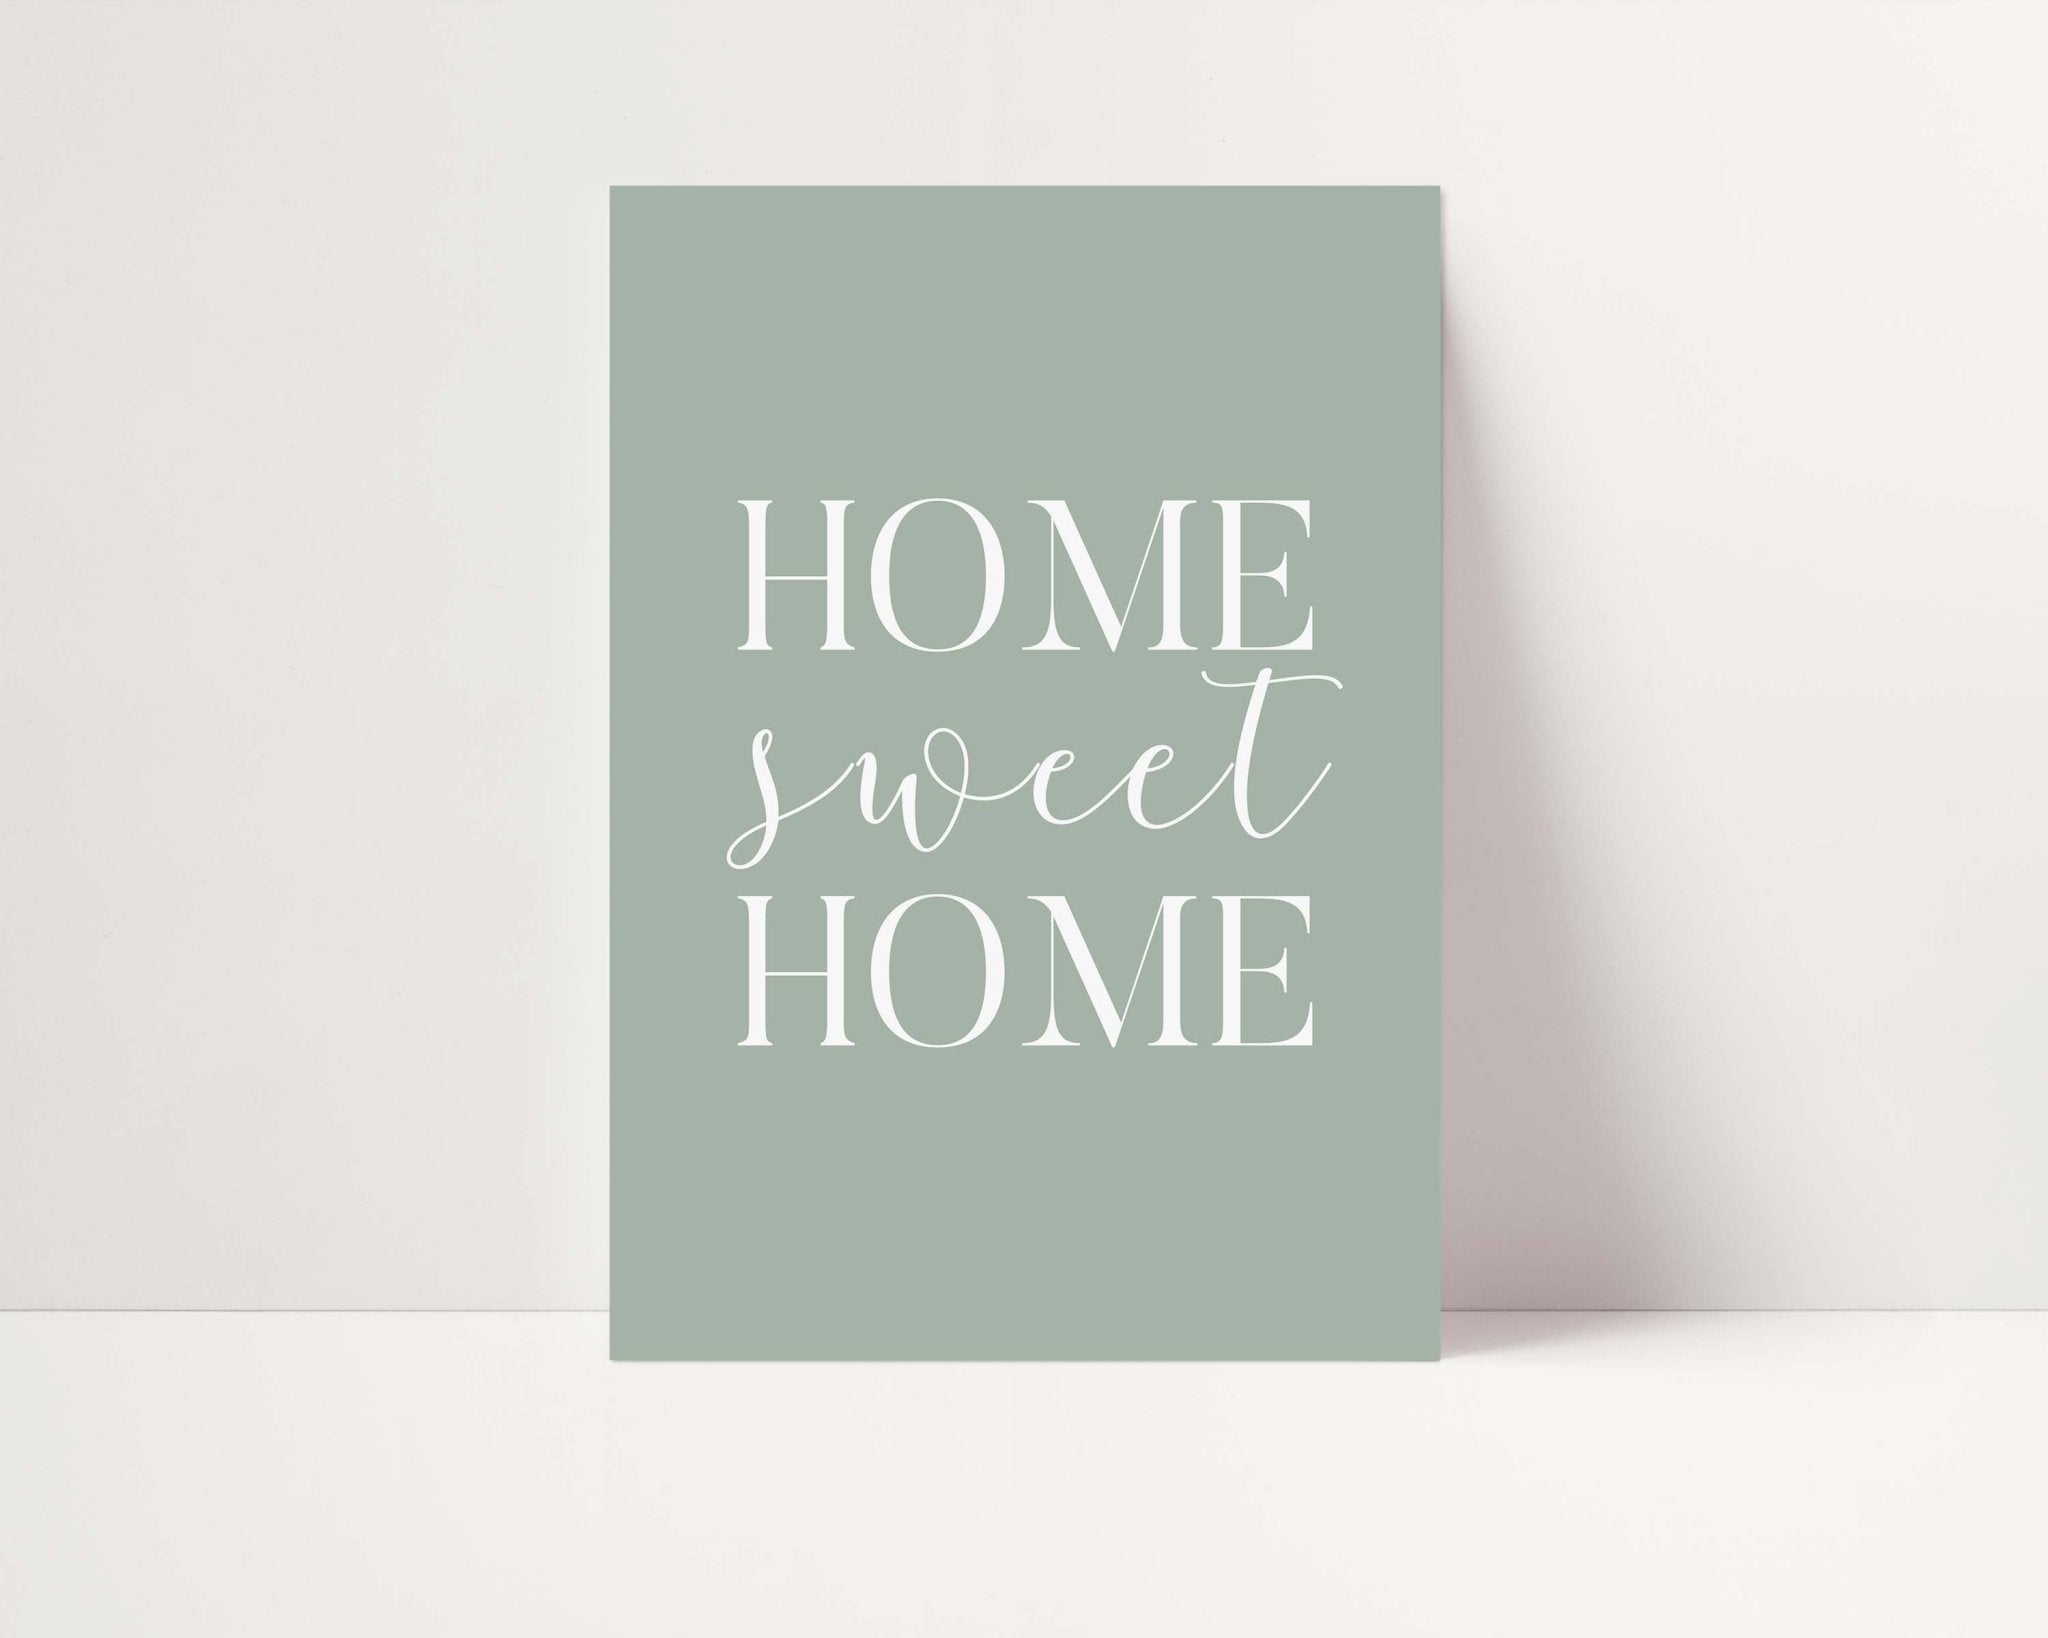 Home Sweet Home Poster - D'Luxe Prints